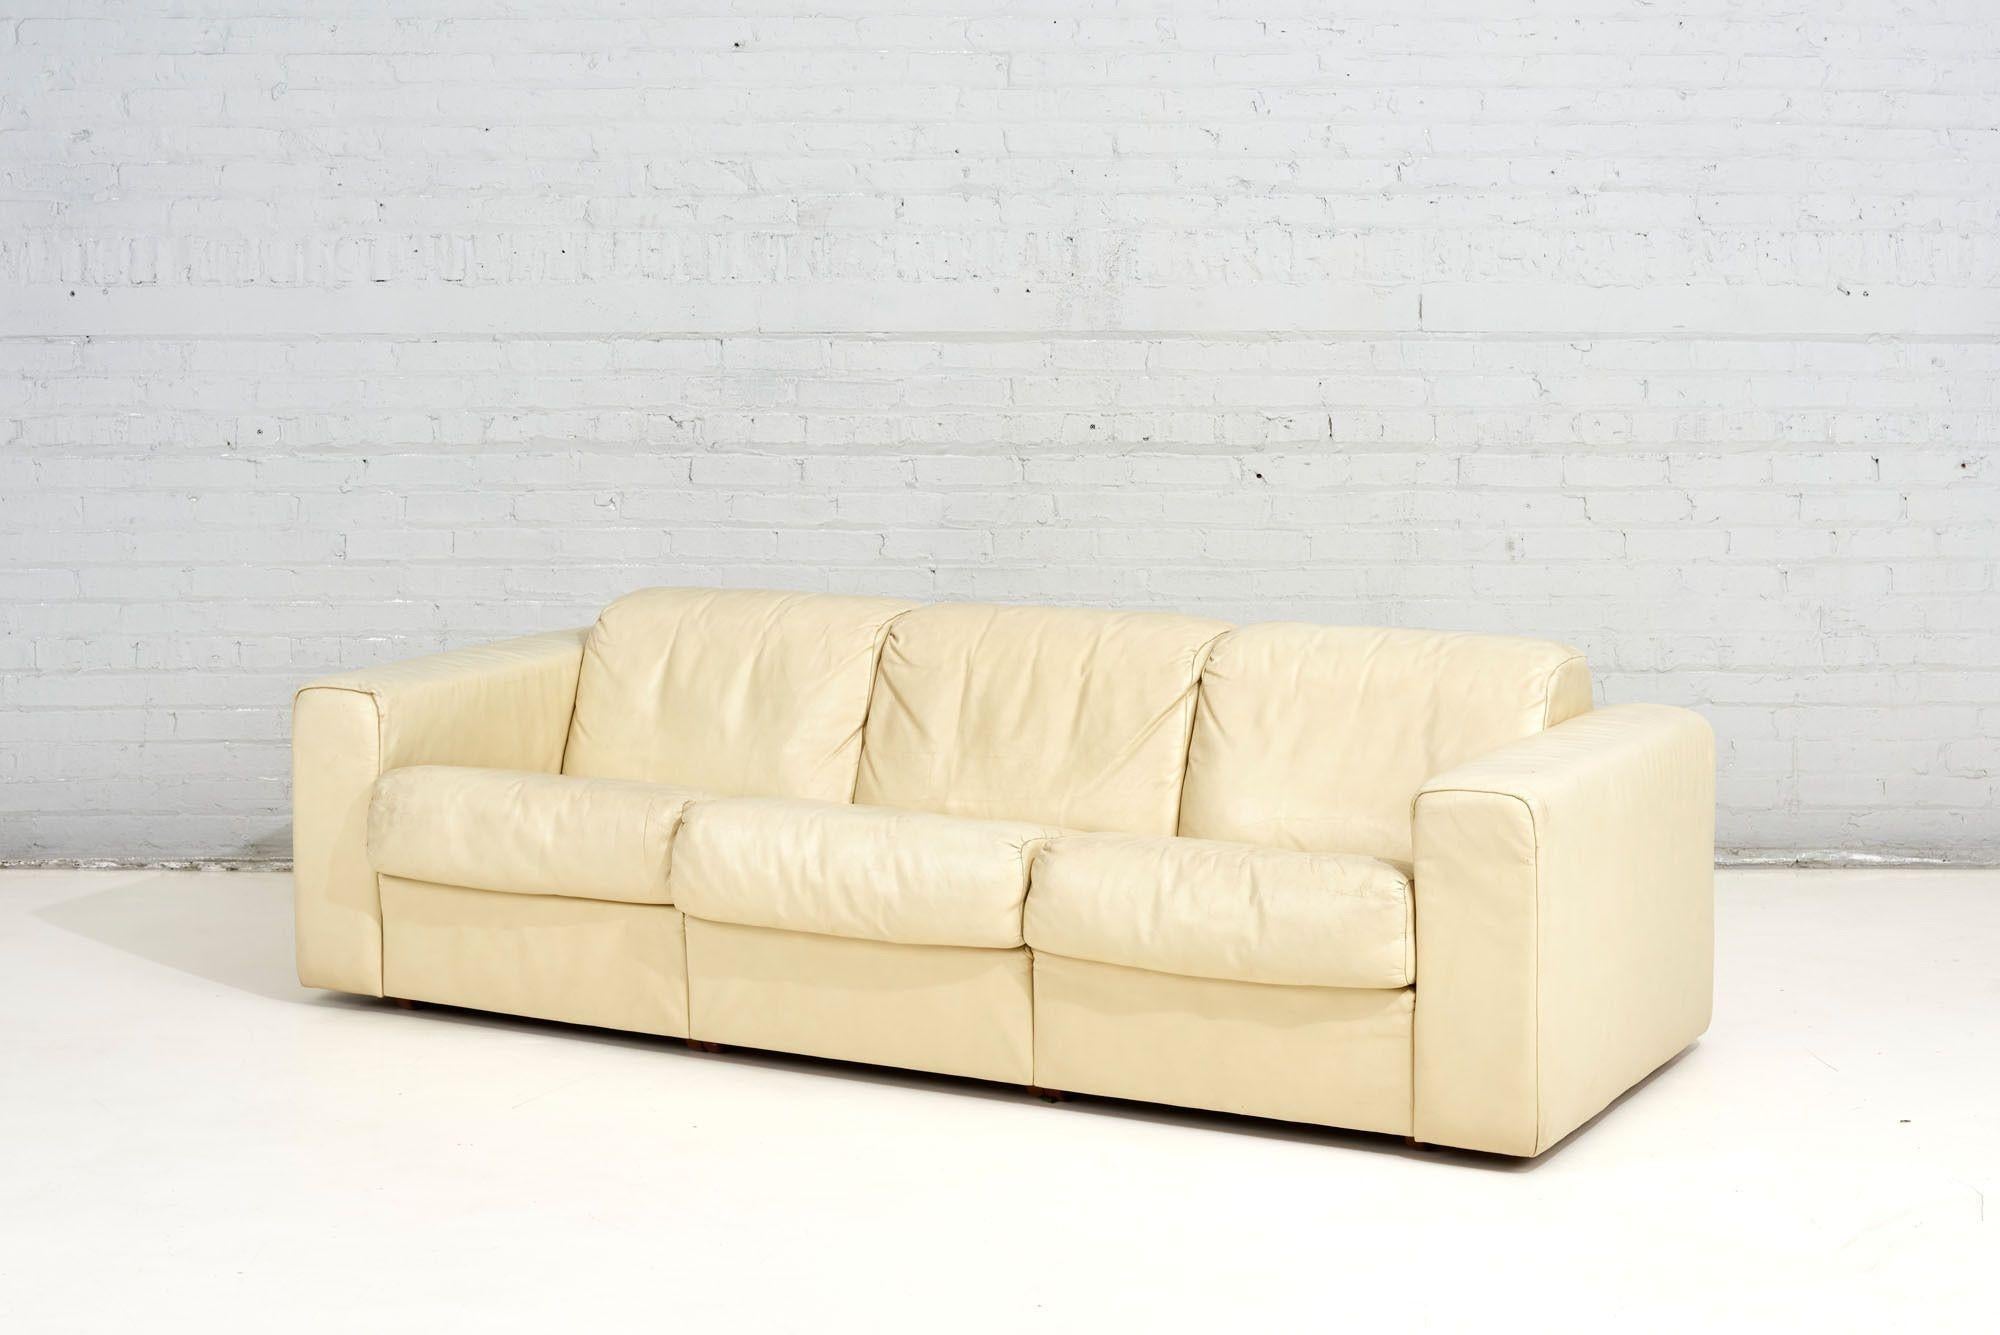 American Baron Sofa by Robert Haussmann for Stendig, Cream Leather, 1970 For Sale